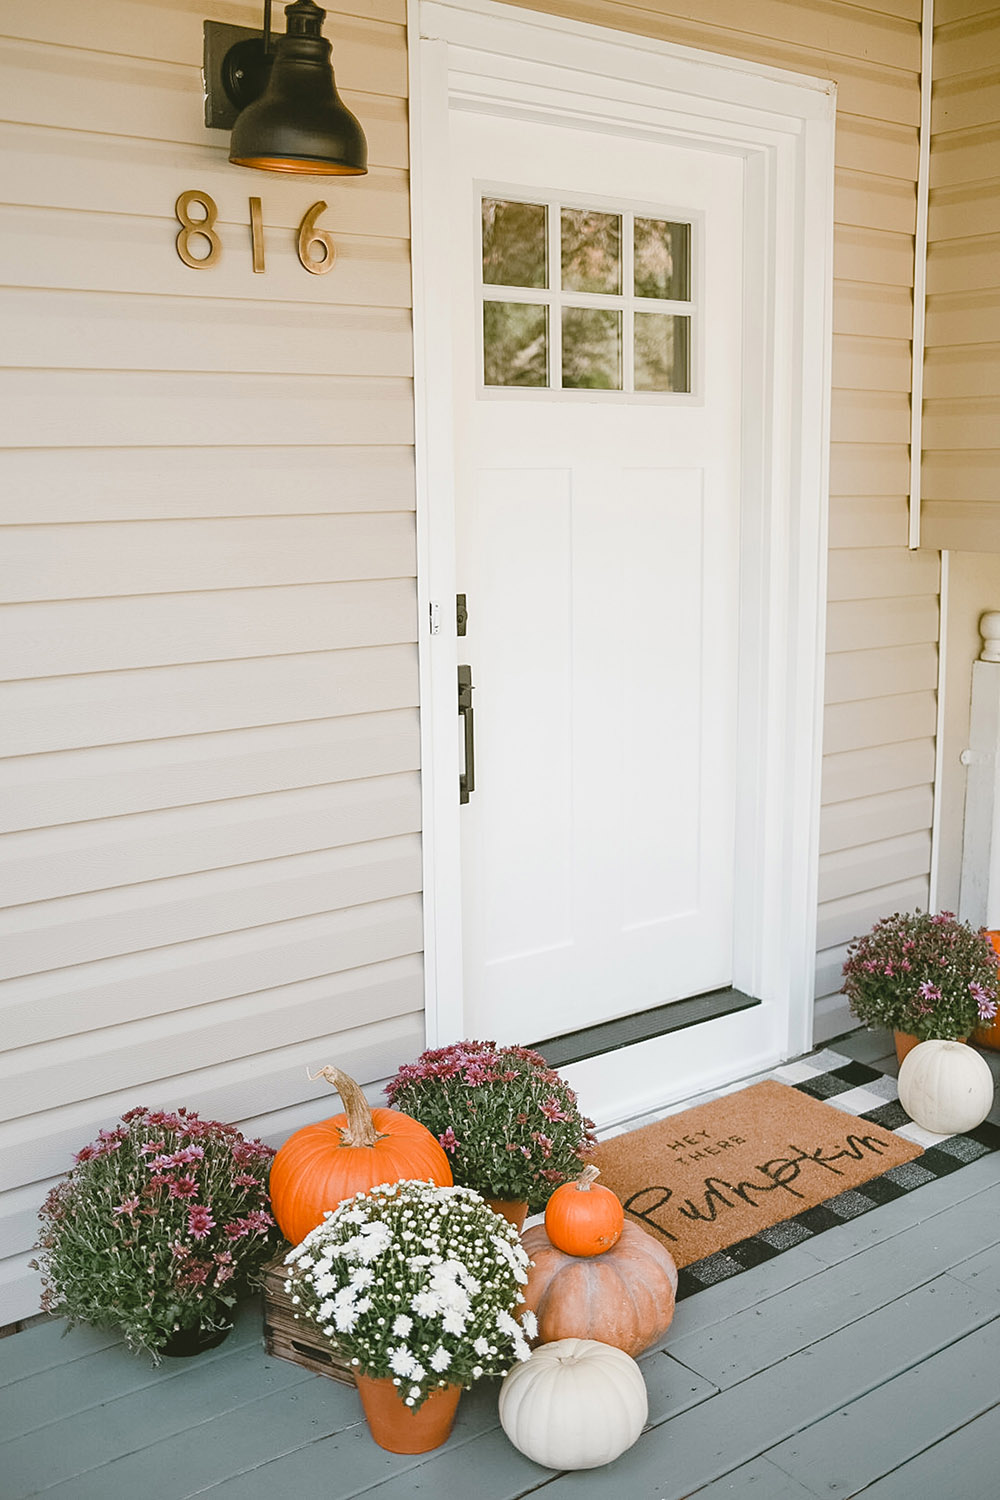 A new white front door with hardware is surrounded by pumpkins and mums.